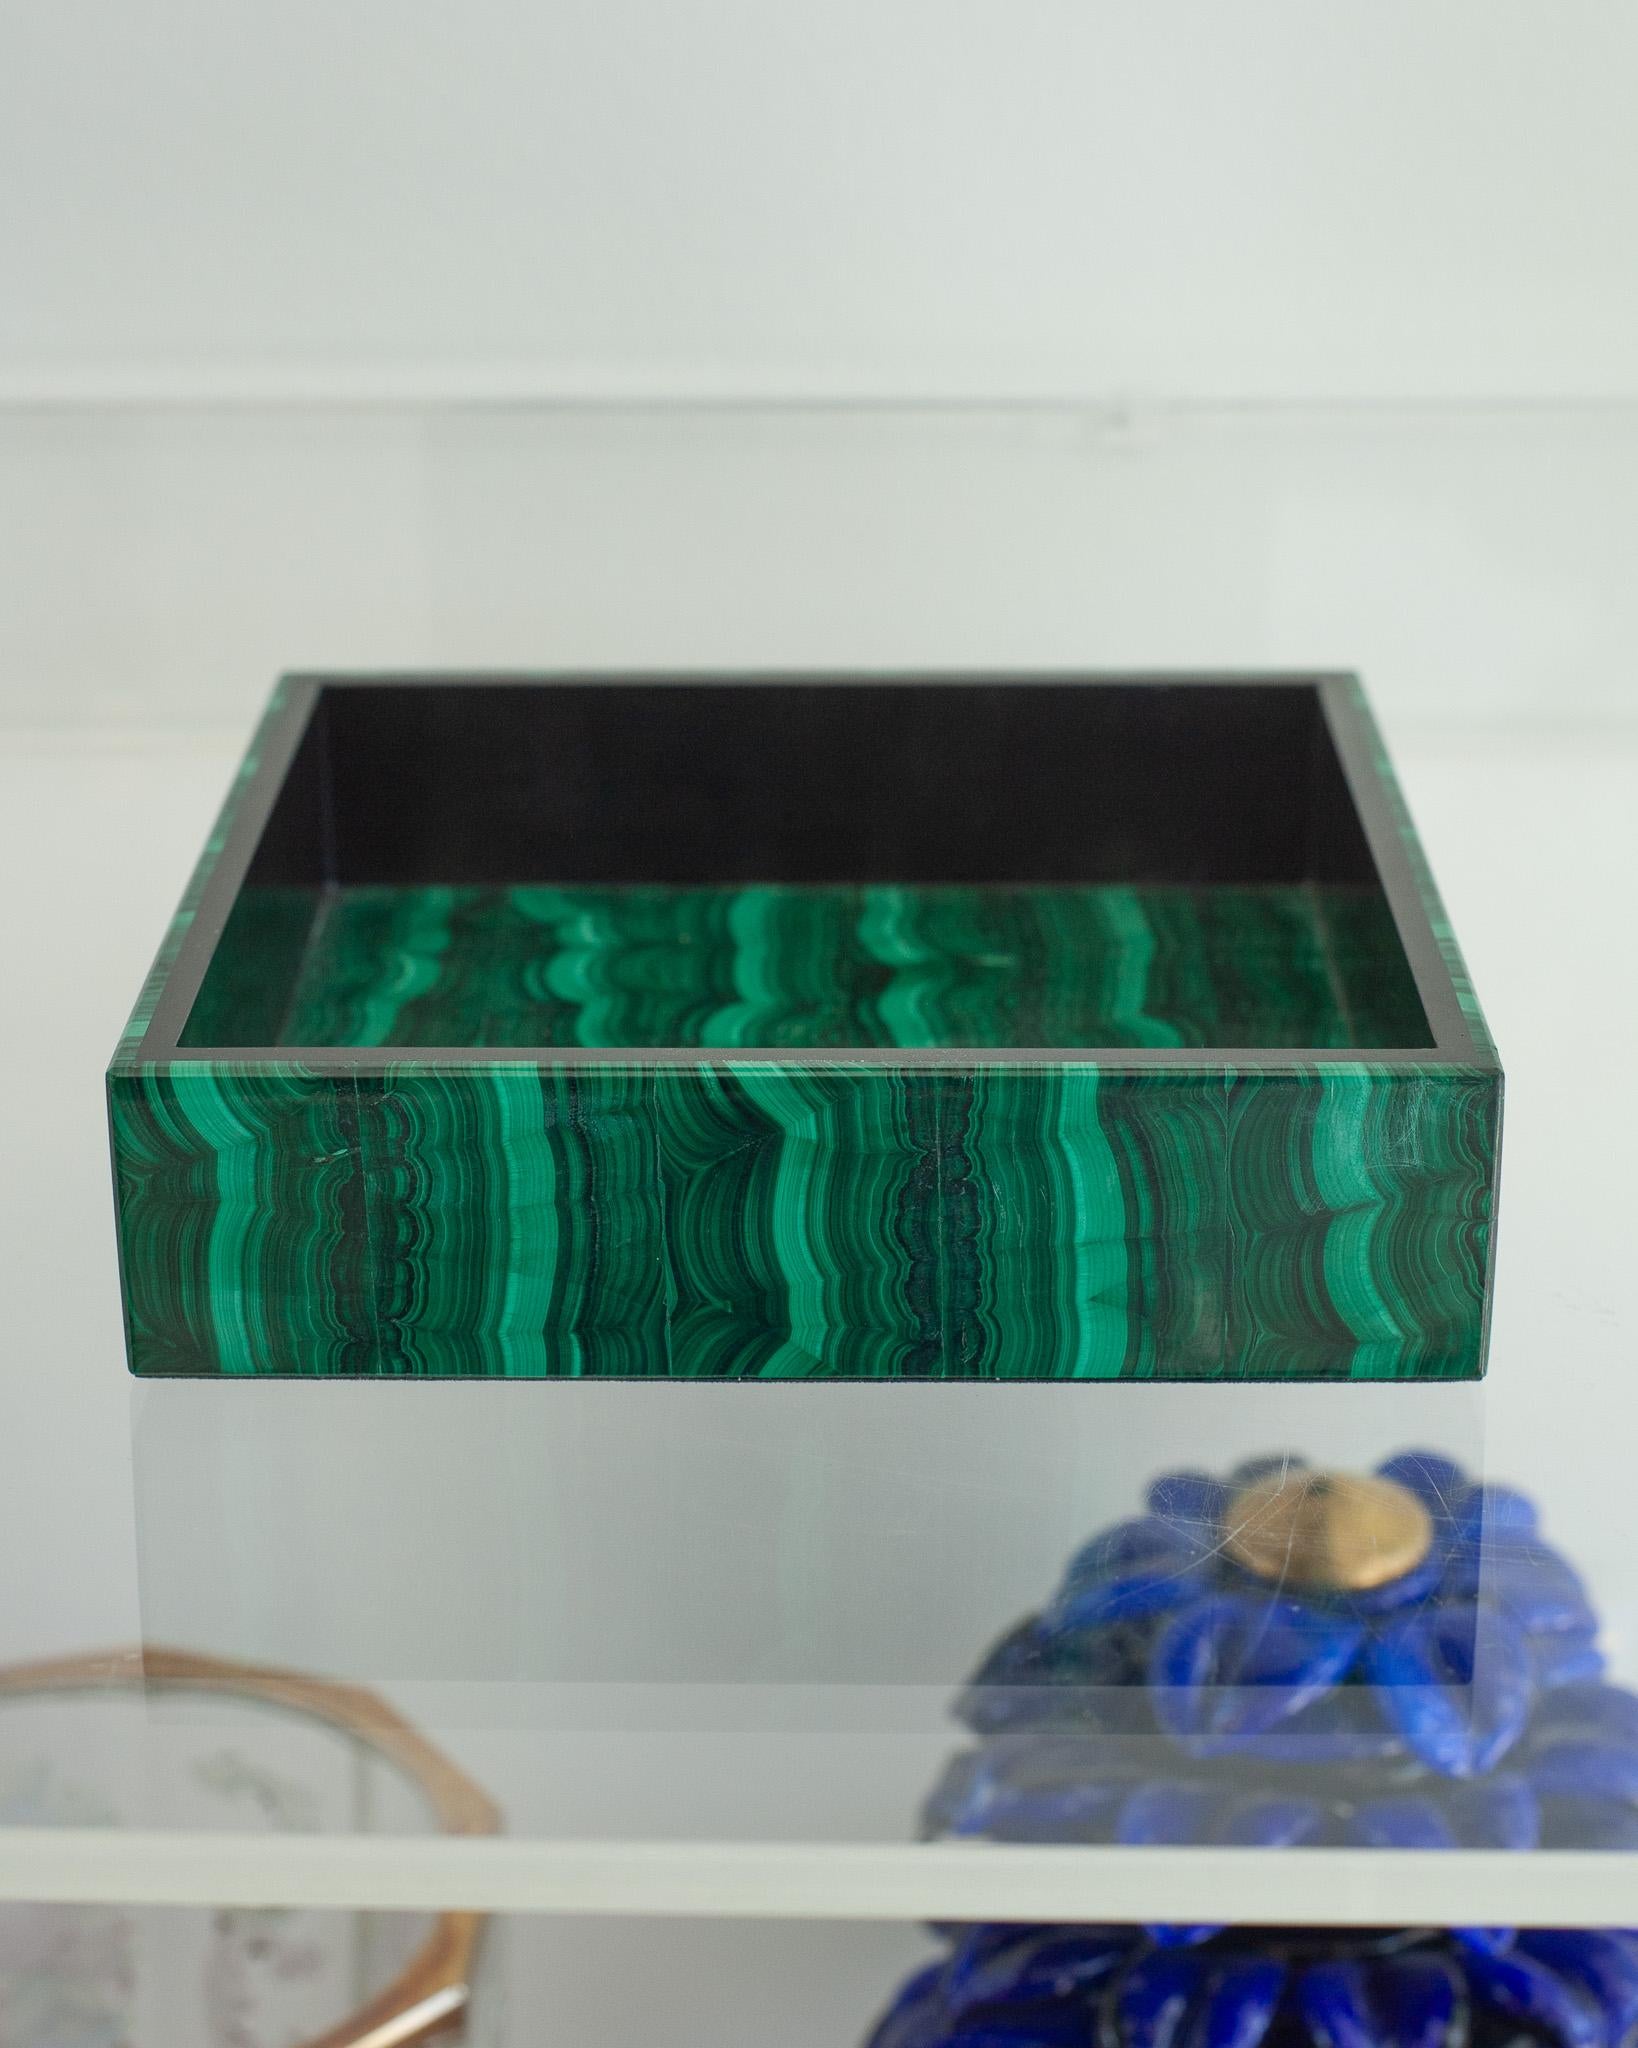 Invite healing energy into your home with this exquisite green malachite and black marble vanity tray. This tray is beautifully made with expert construction and exceptionally matched stripes malachite. Lined with black marble to contrast the bright